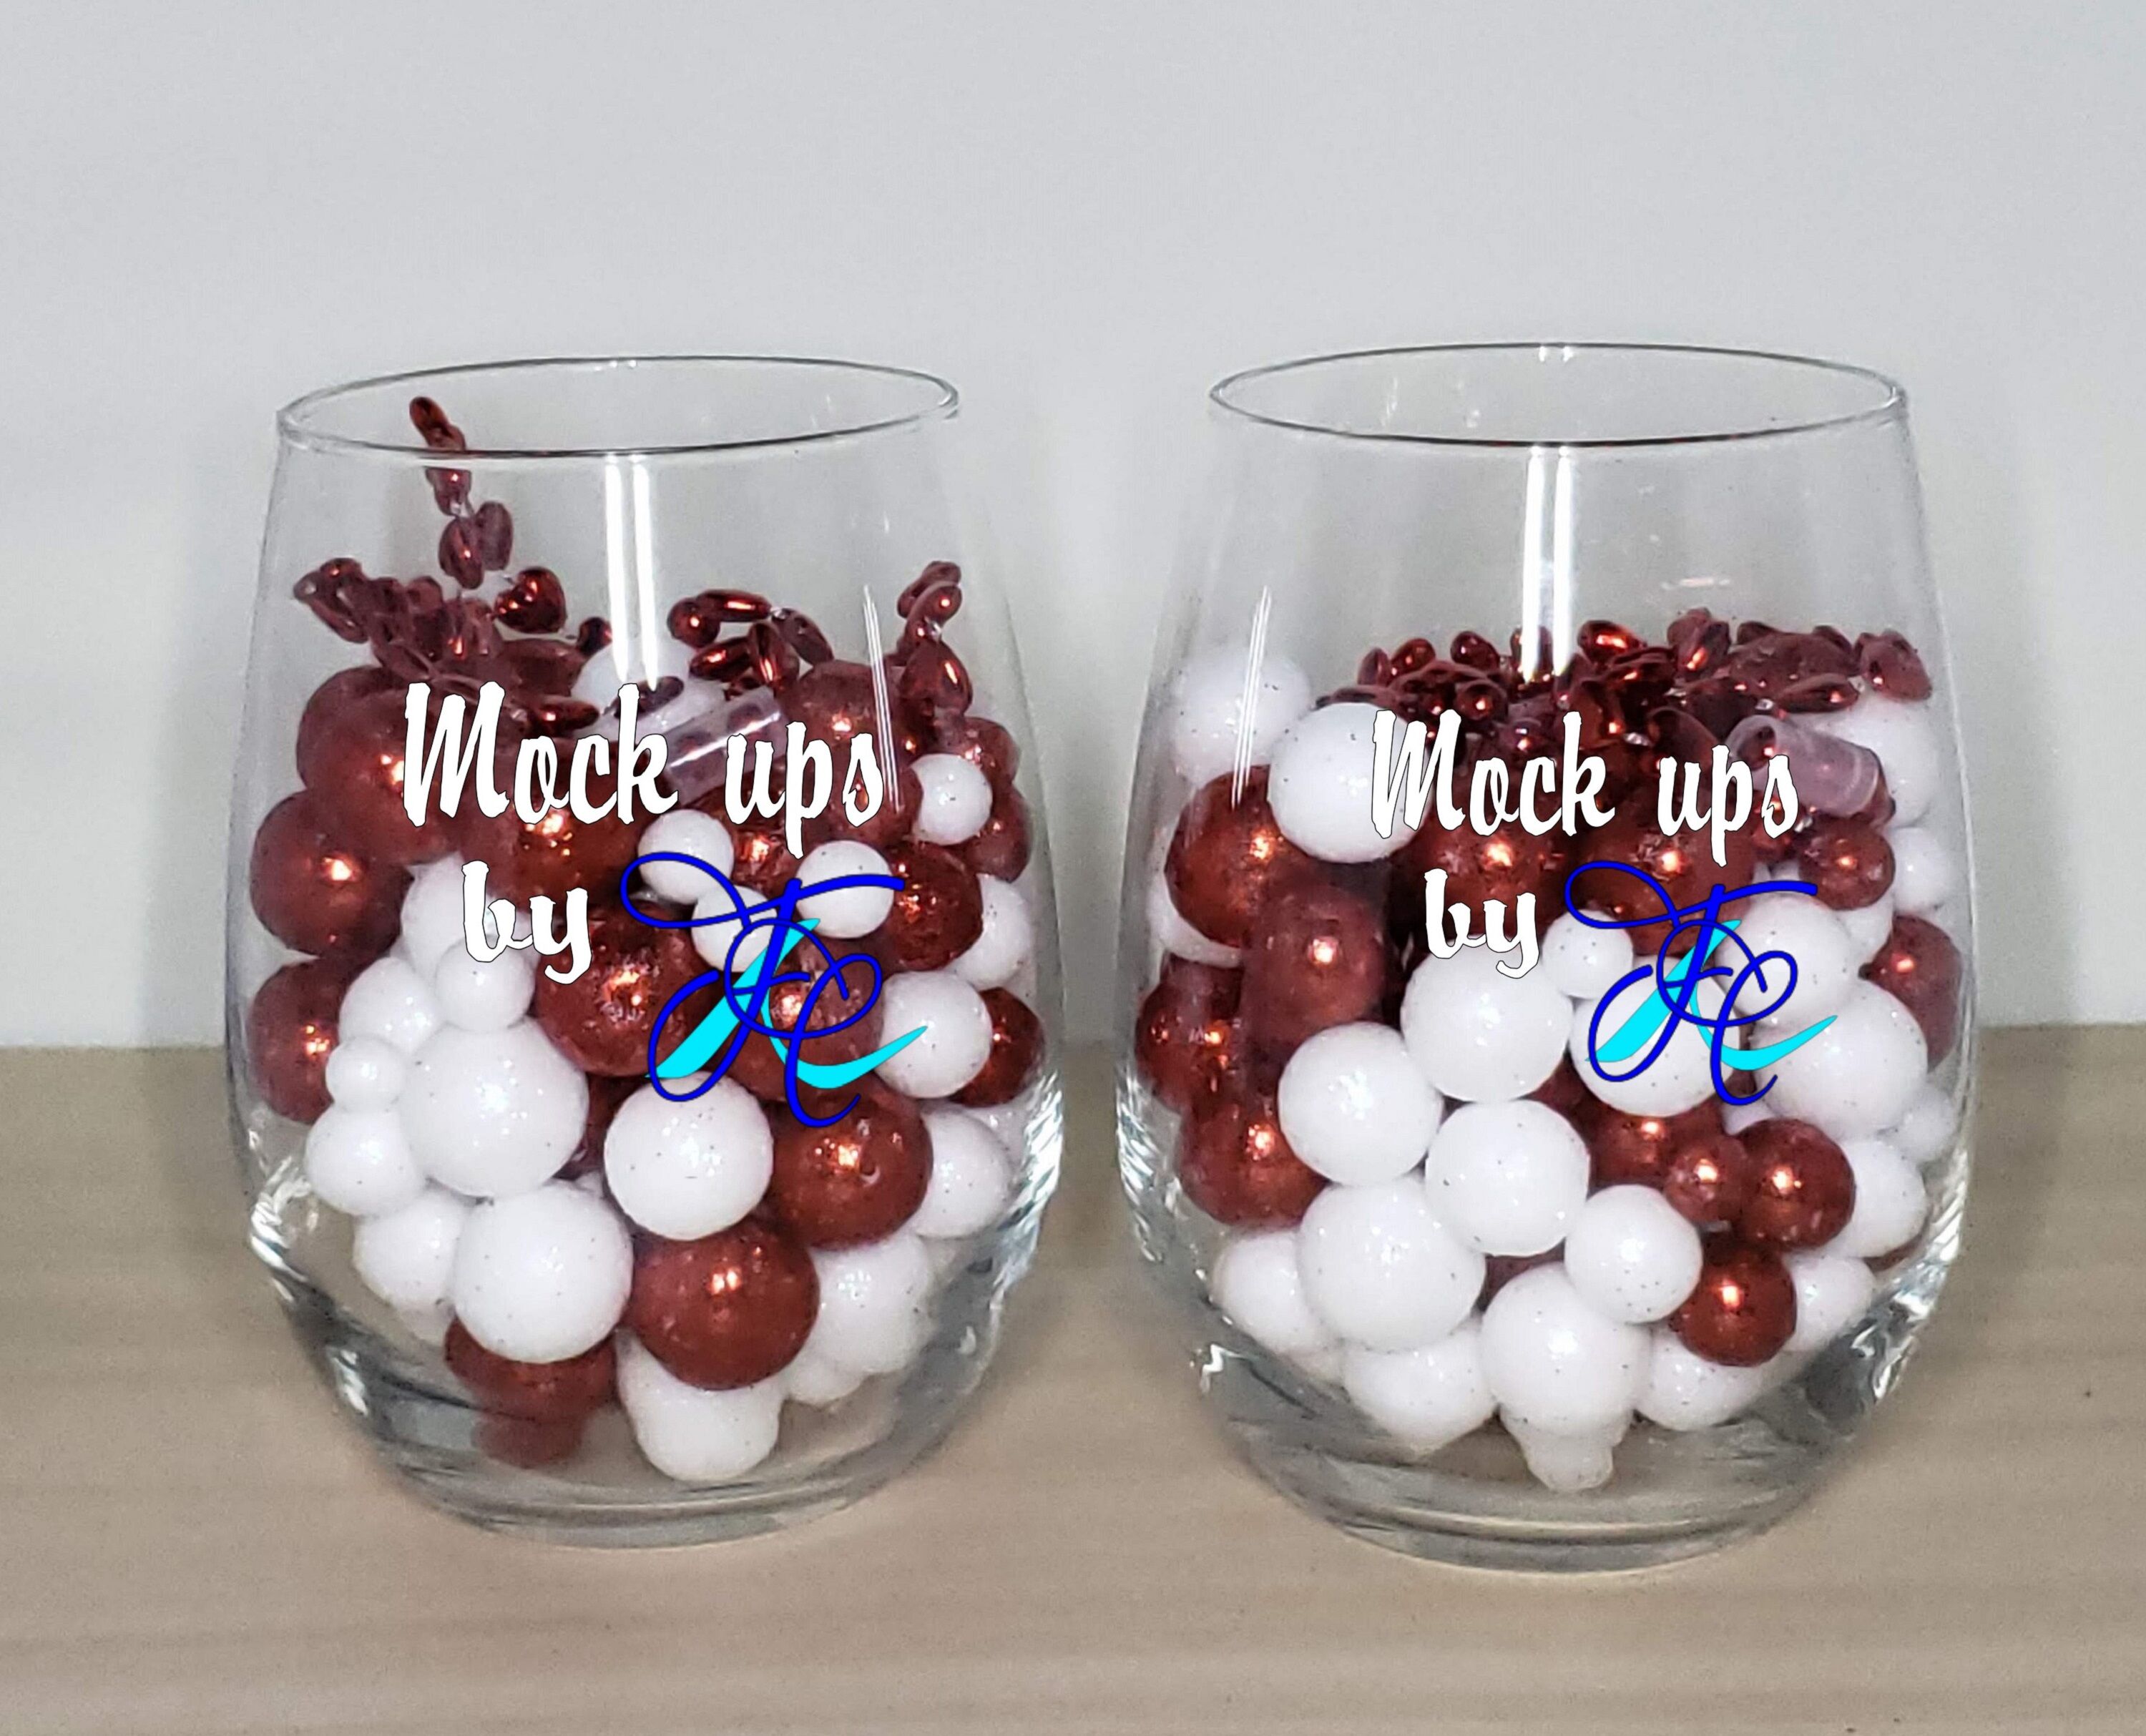 No Stem Wine Glass Mockup with Red Valentine Hearts Stock Photo by  ©melissa6980 341419726